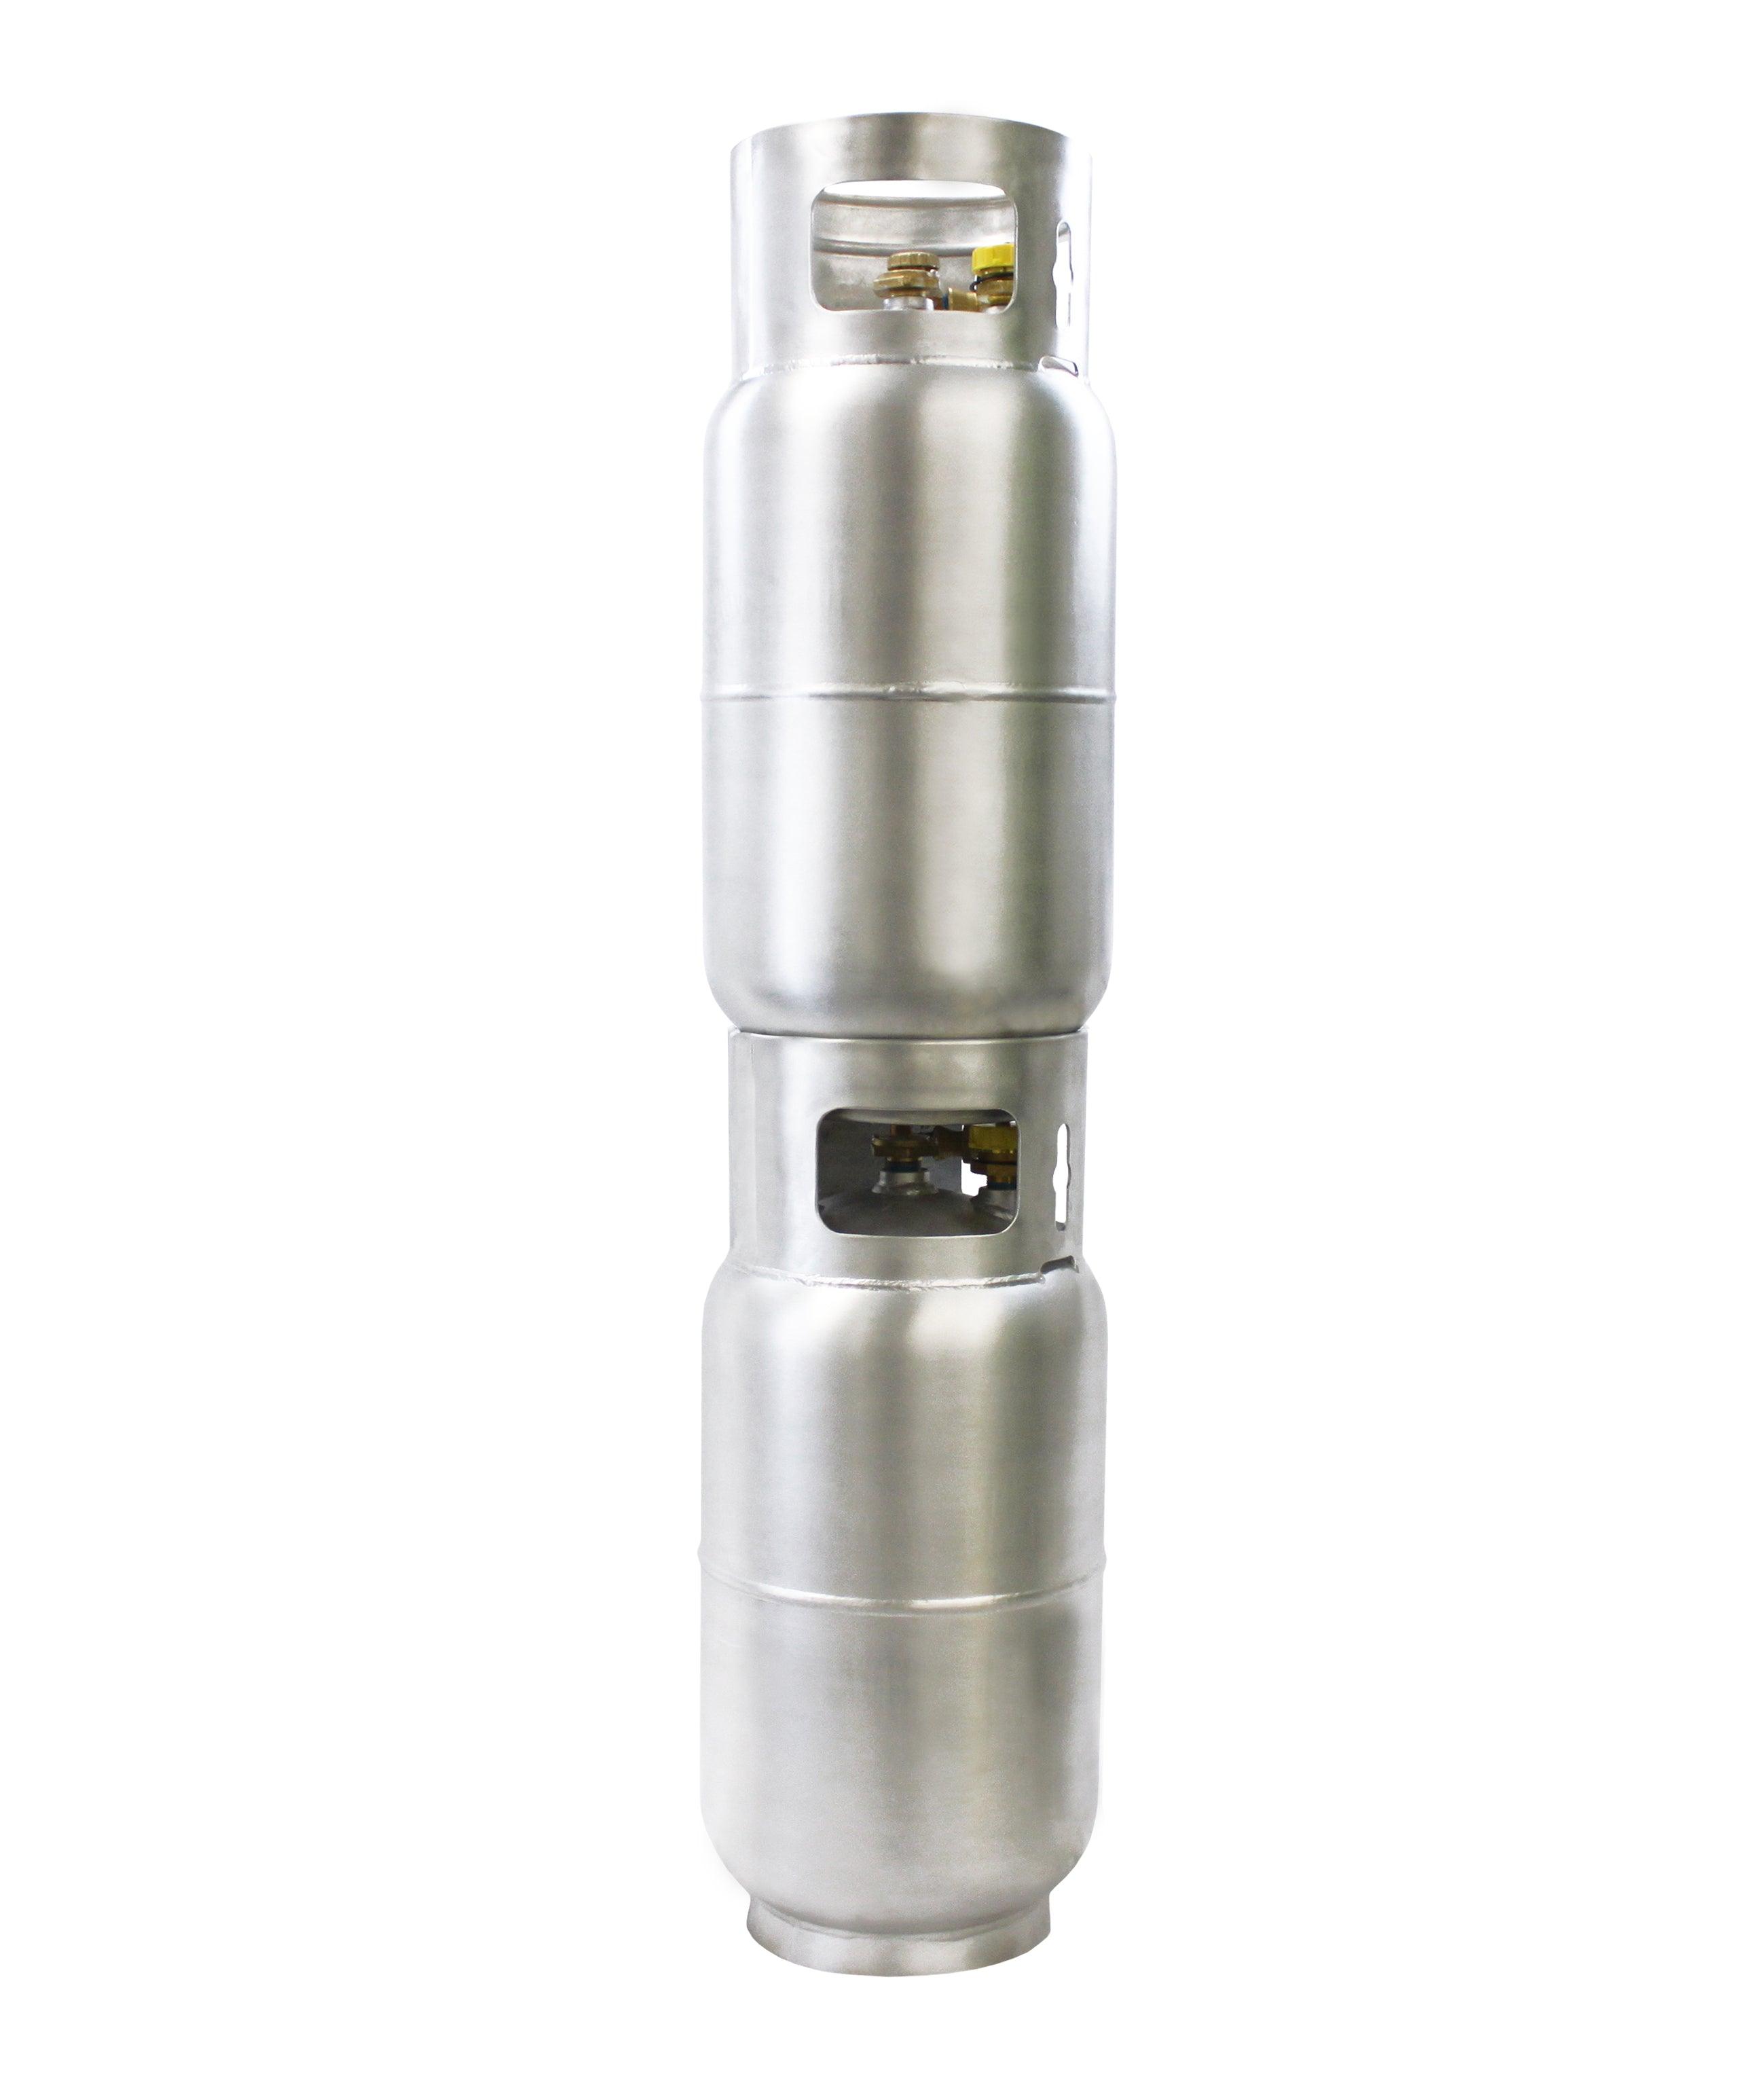 33.5 lbs (7.5 gallon) Manchester Aluminum Propane Forklift Cylinder with  Fill Valve (usually arrives within 1 week) - Propane Tank Store